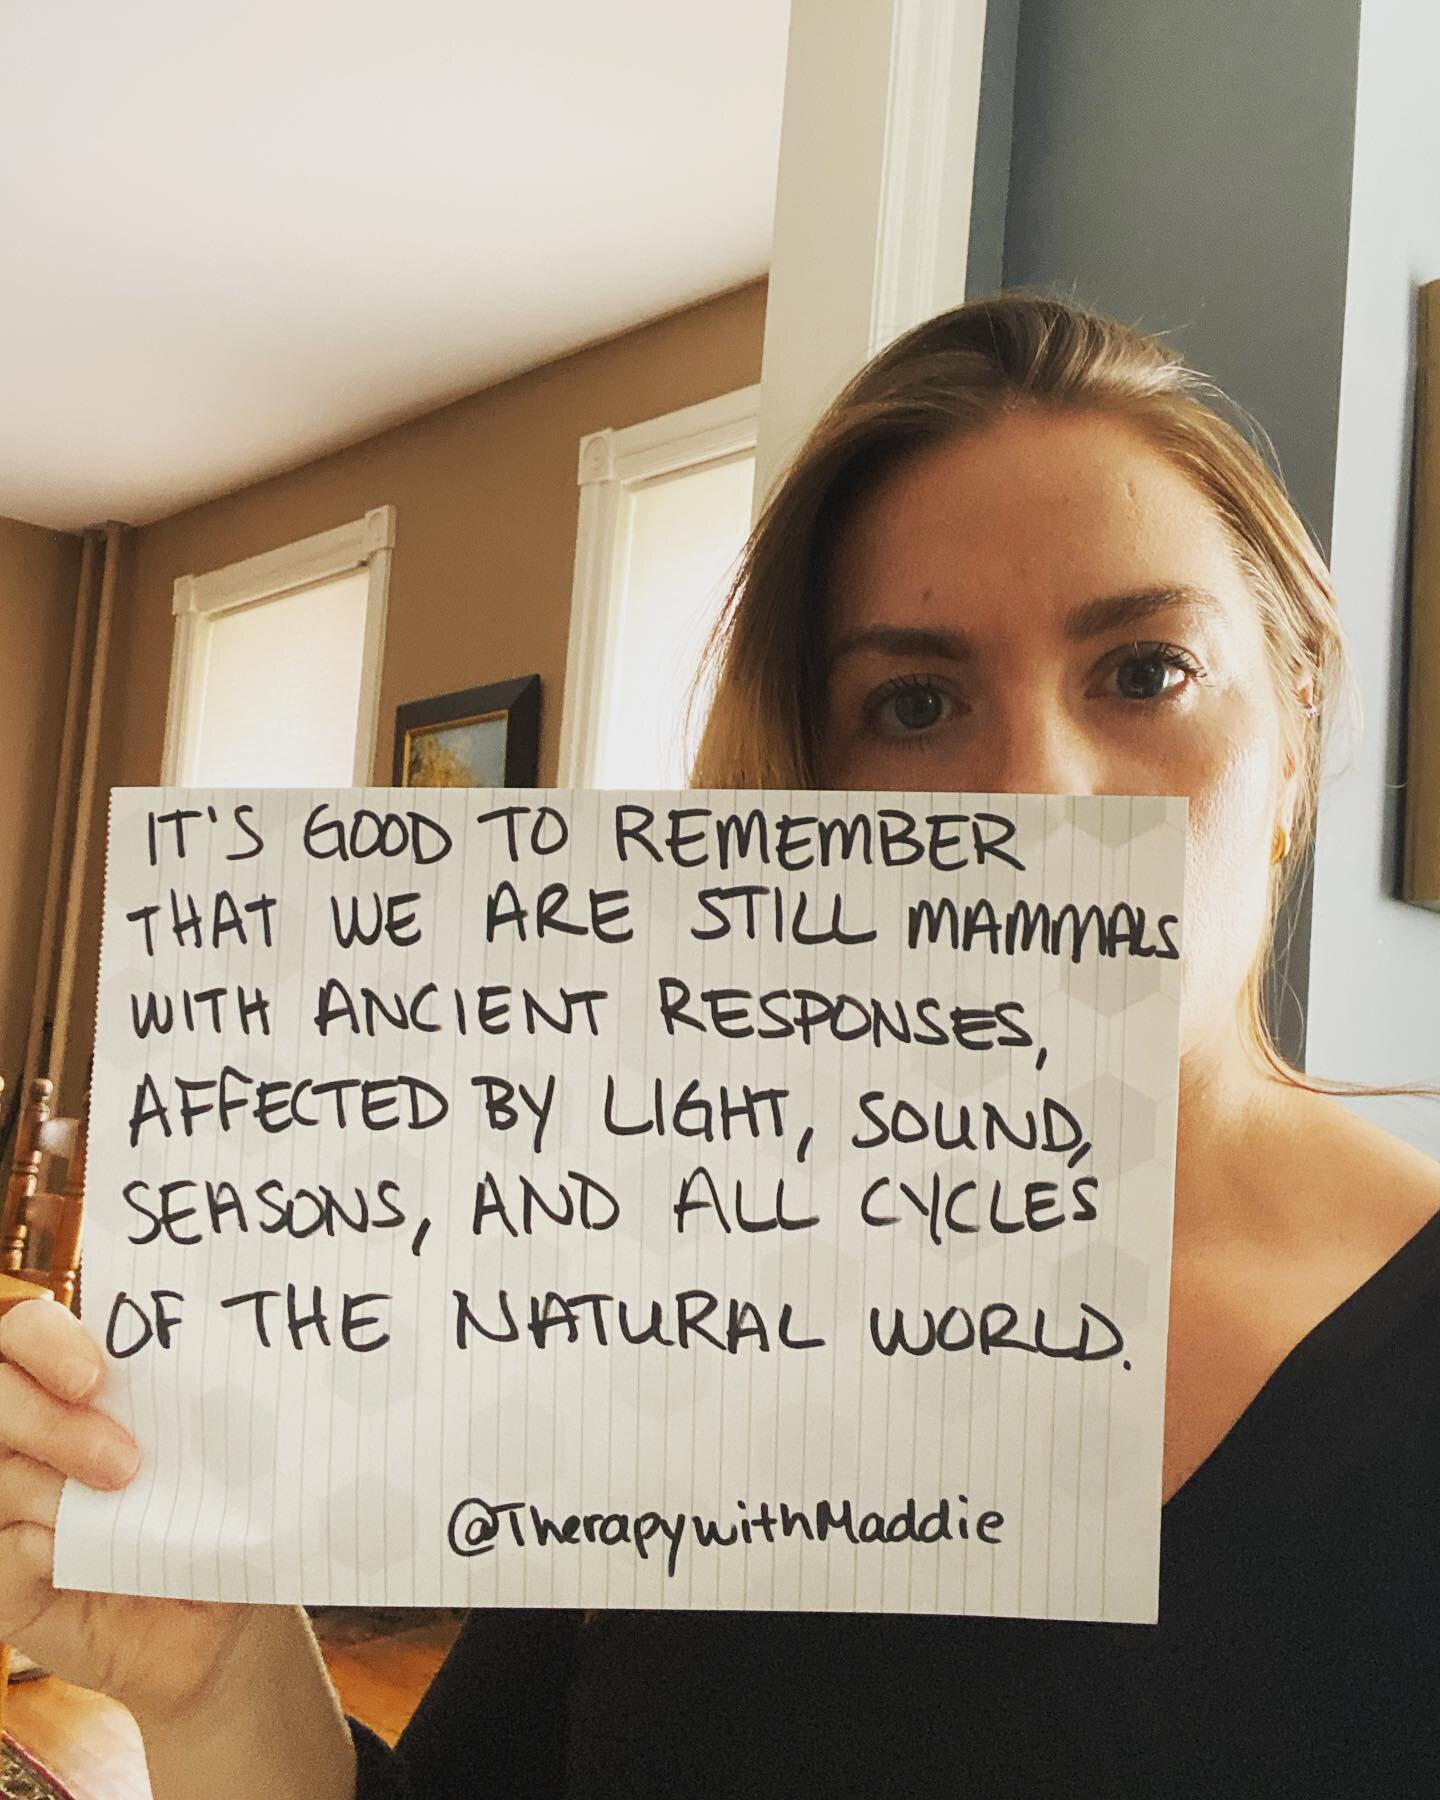 It&rsquo;s good to remember that we are mammals, that we have not evolved enough to be unaffected by light, sound, seasons, vibrations, and all other natural cycles of the Earth. It&rsquo;s good to remember that a lot of our responses to things are a